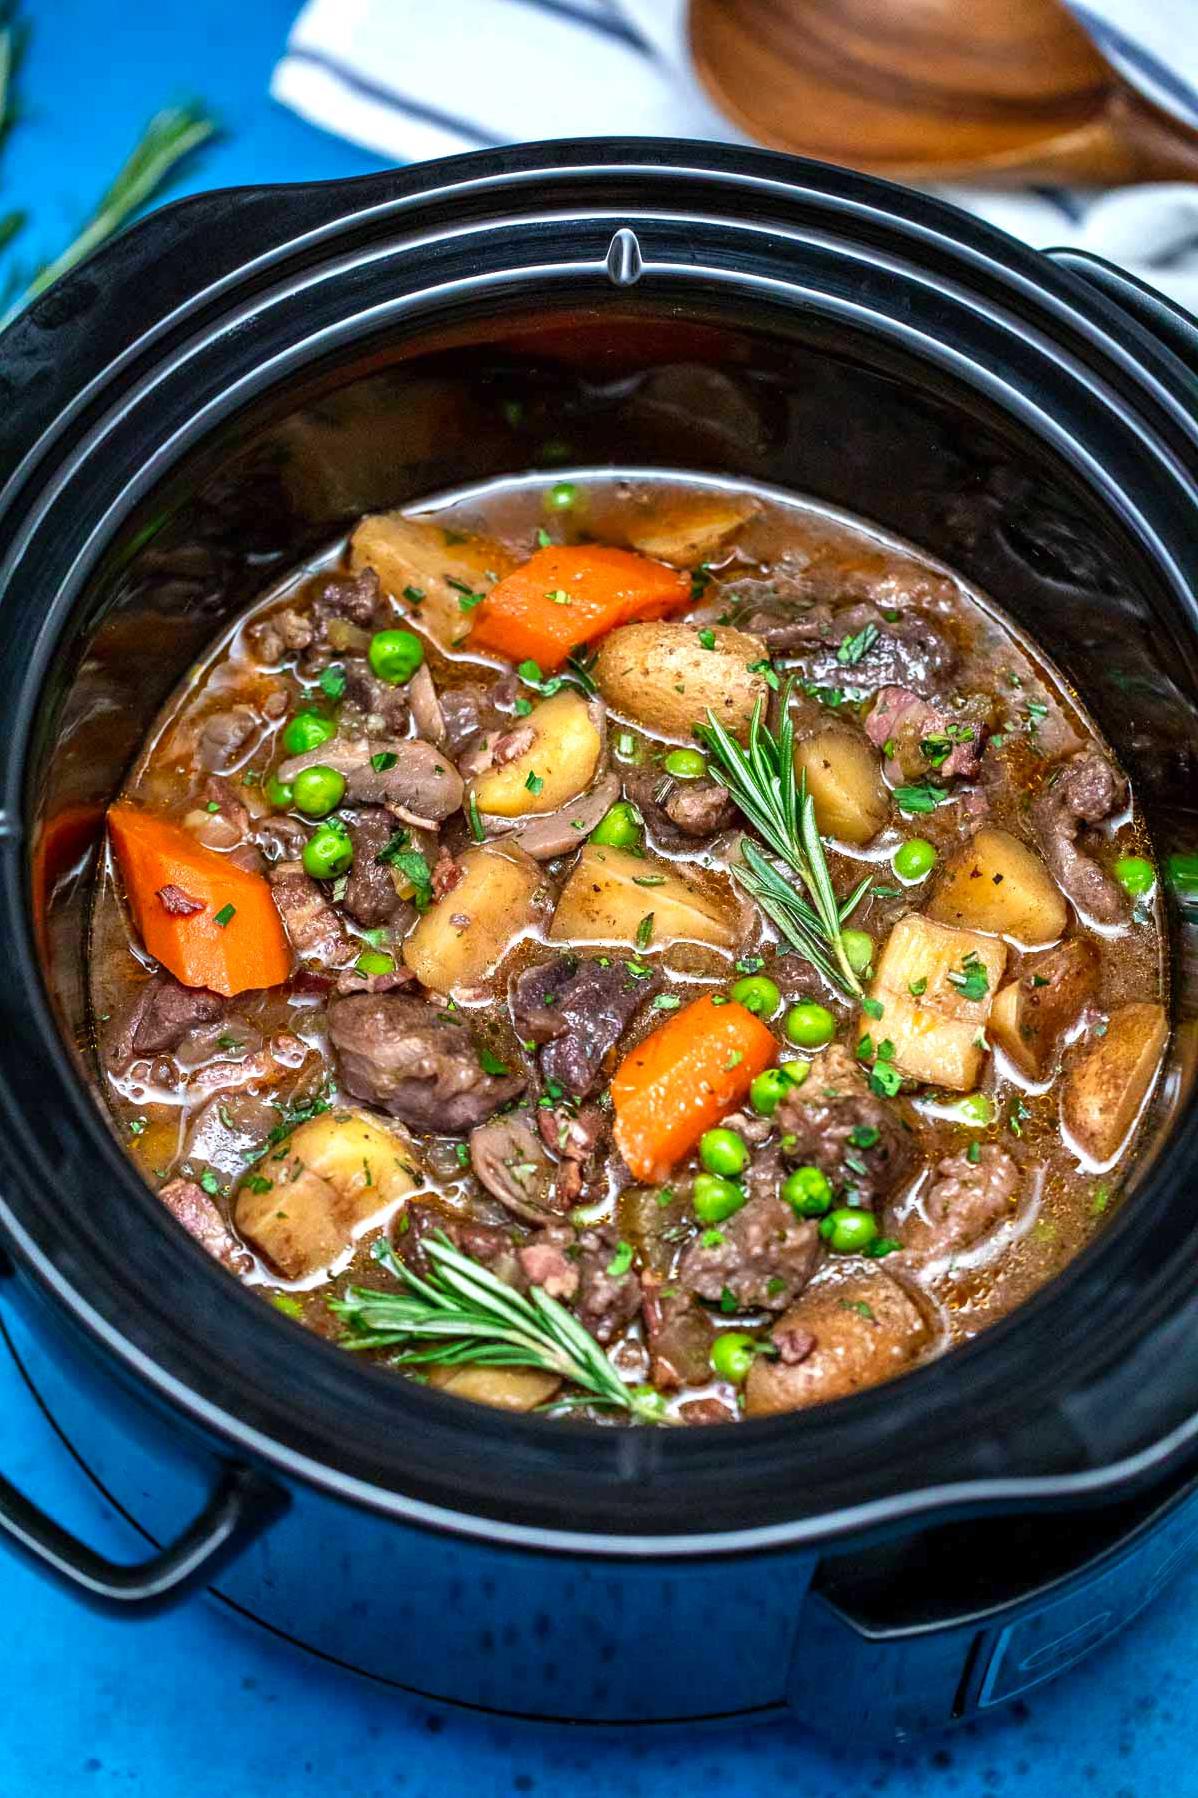  The combination of savory beef, hearty potatoes, and sweet carrots makes for a true classic.